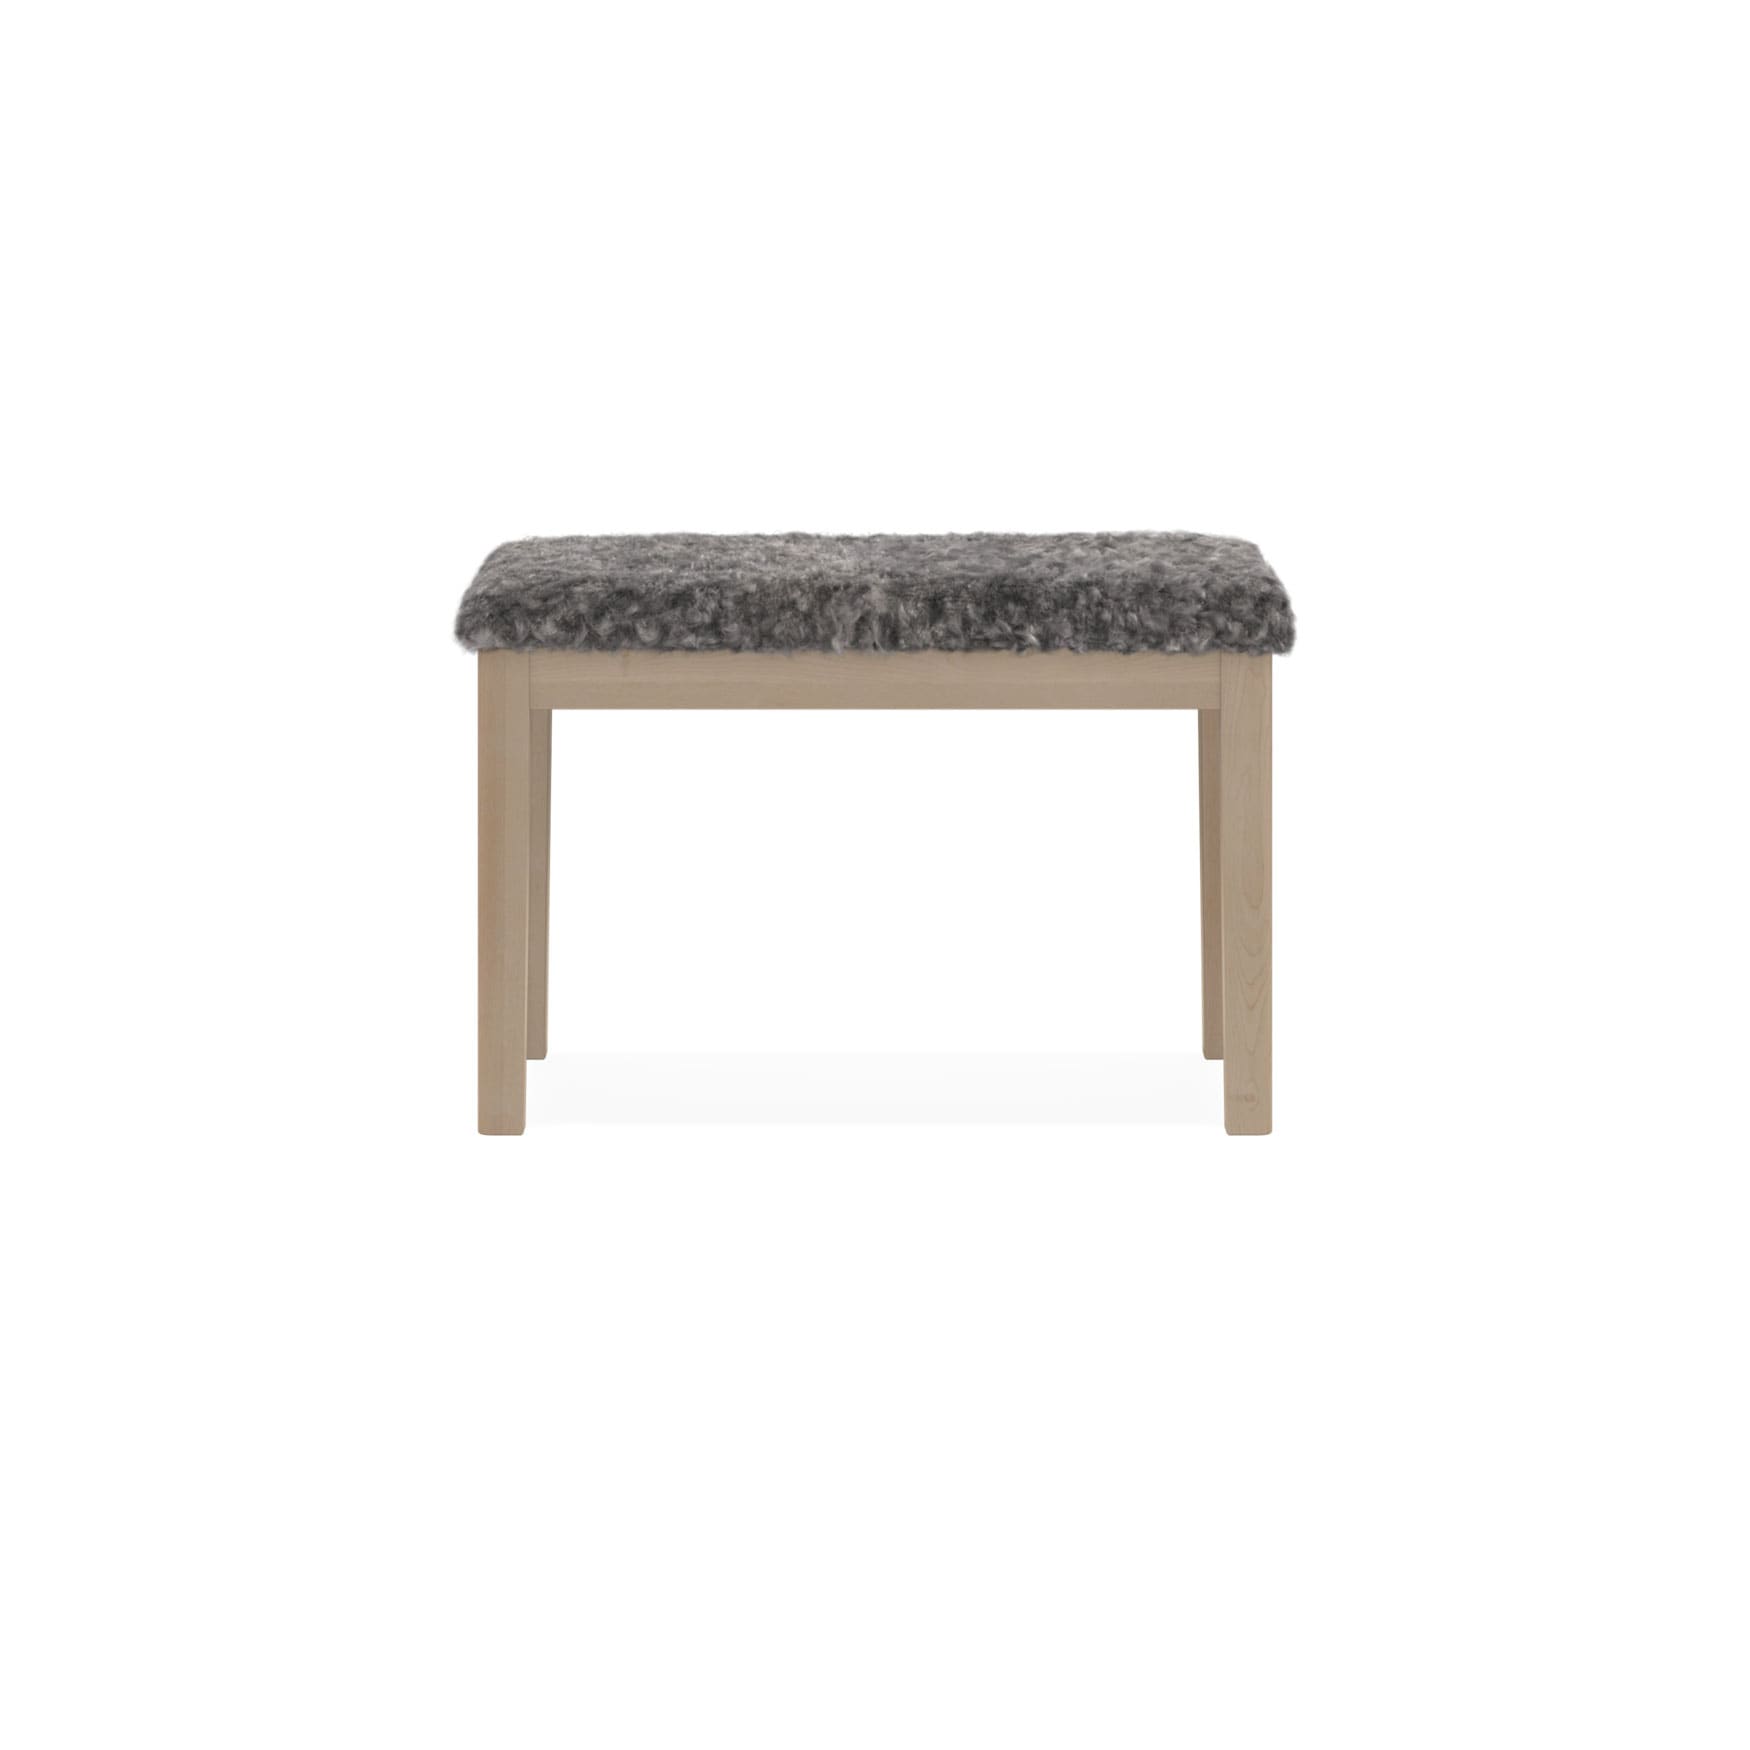 Multi-O bench with upholstered seat